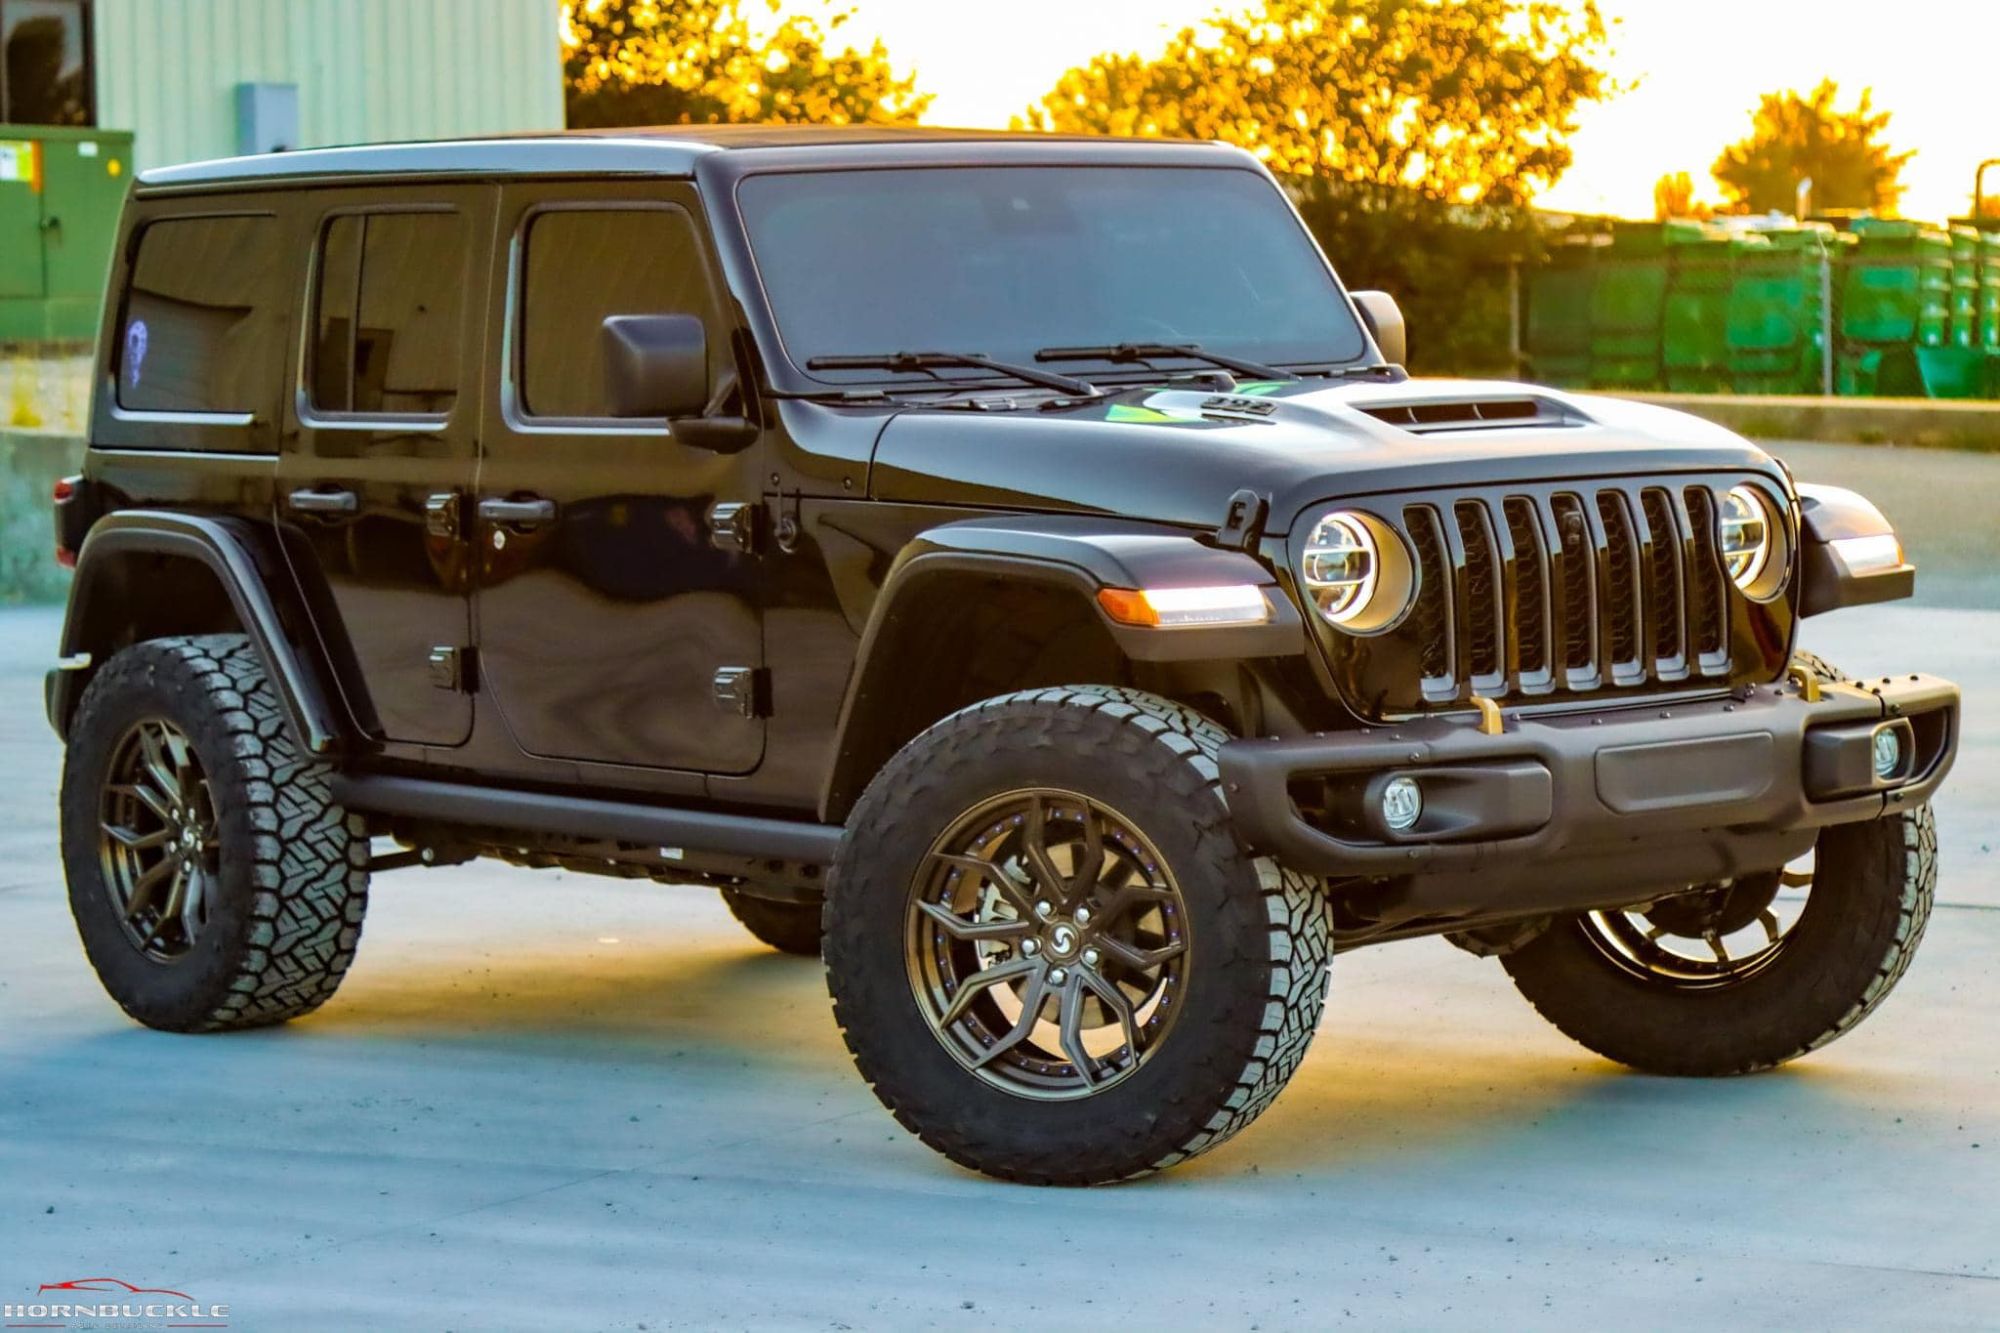 Jeep Wrangler JL with 20×9.5-inch Signature SV308S